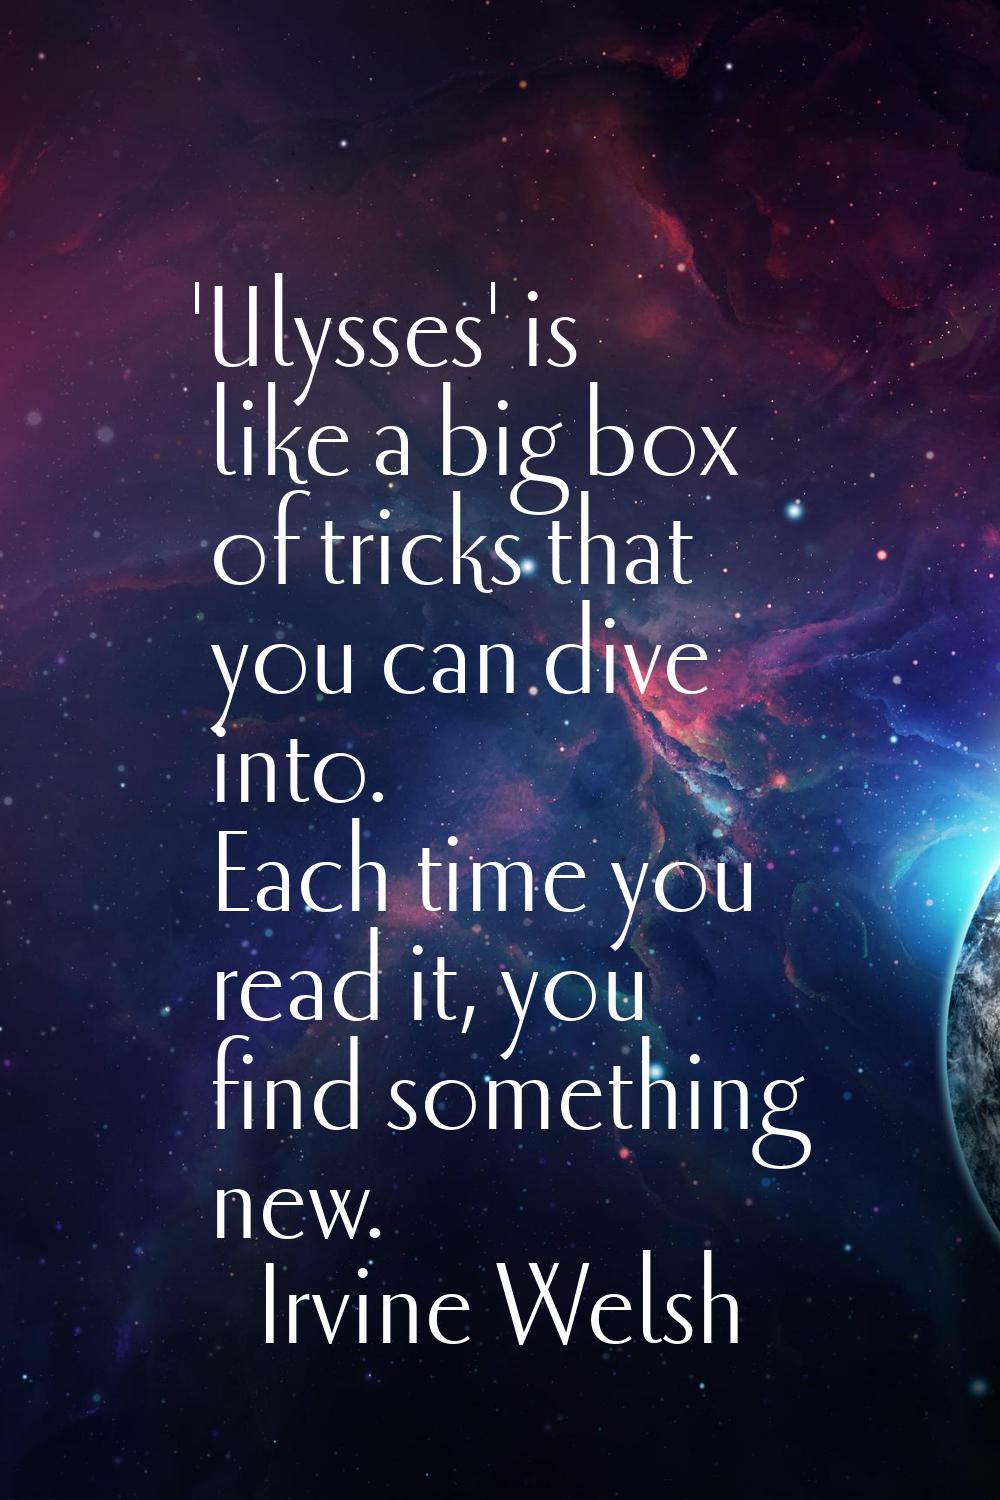 'Ulysses' is like a big box of tricks that you can dive into. Each time you read it, you find somet